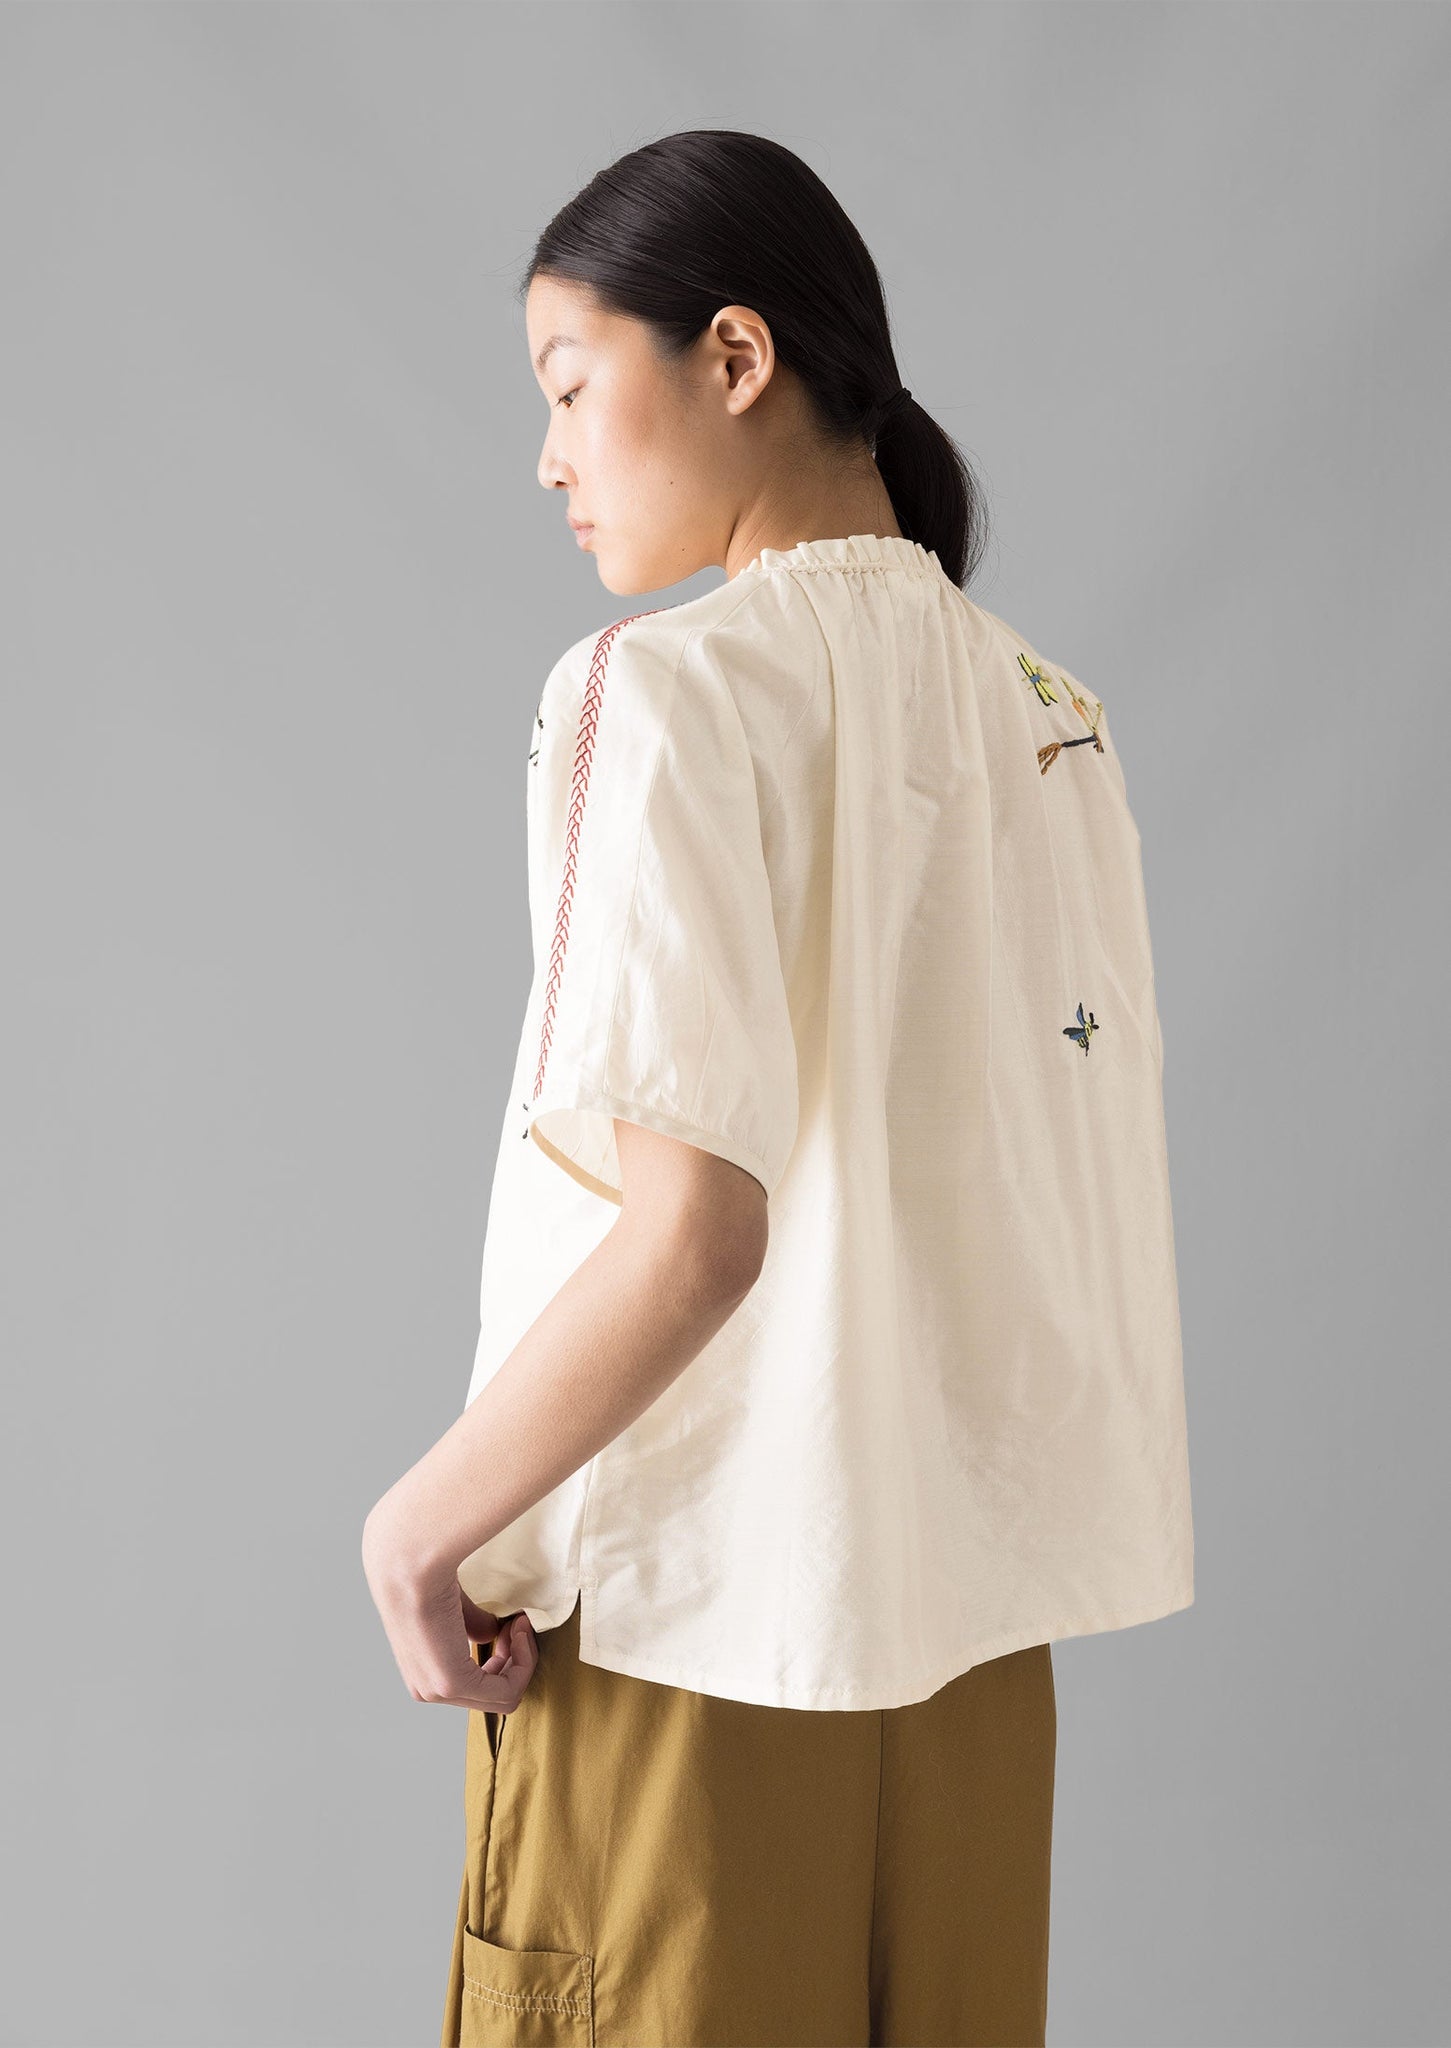 Hand Embroidered May Flies Silk Shirt | Multi